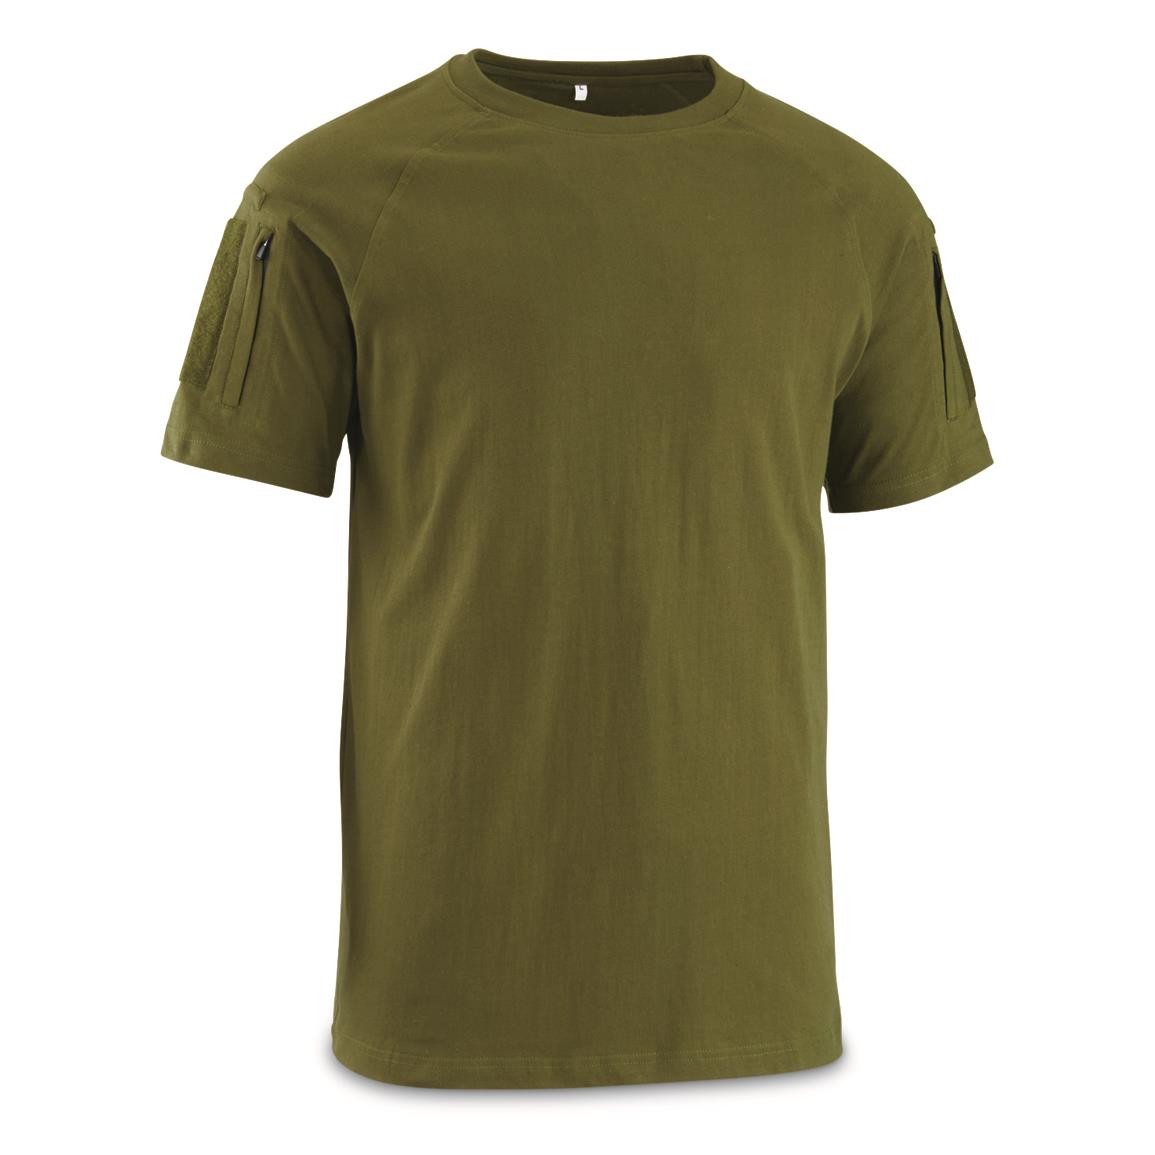 Brooklyn Armed Forces Zelenskyy Tactical T-shirt, Olive Drab